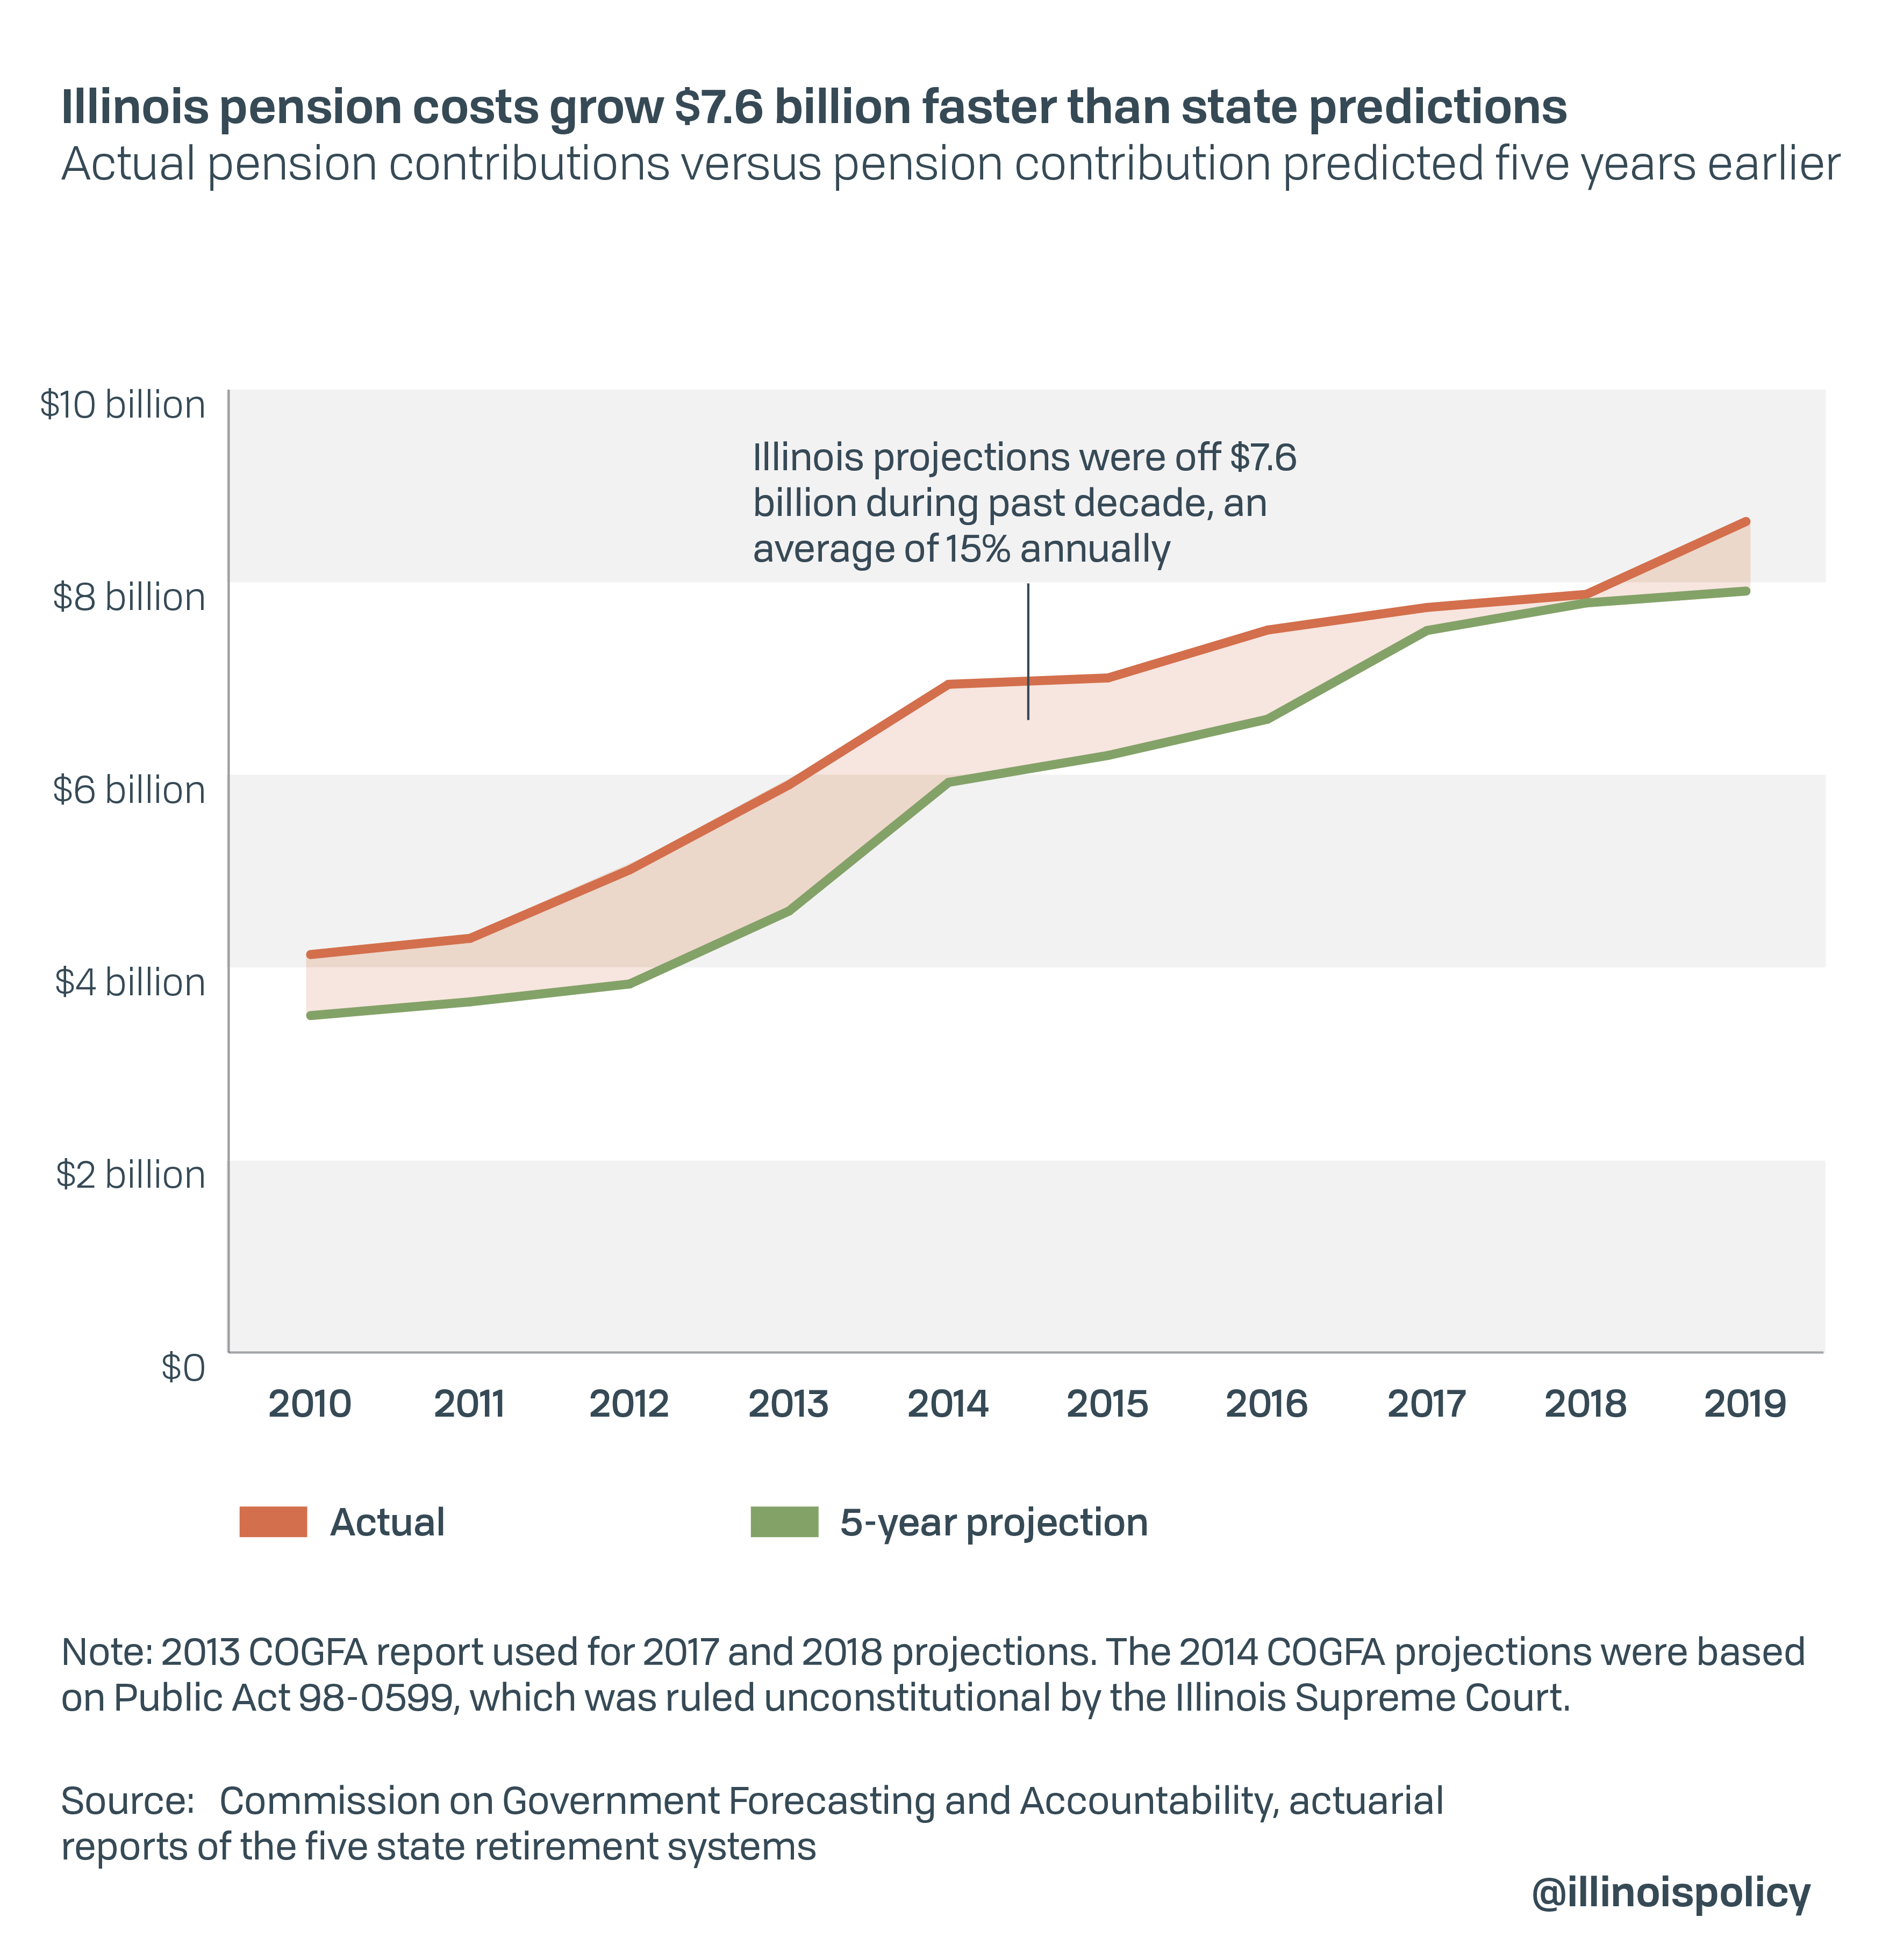 Illinois pension costs grow $7.6 billion faster than state predictions